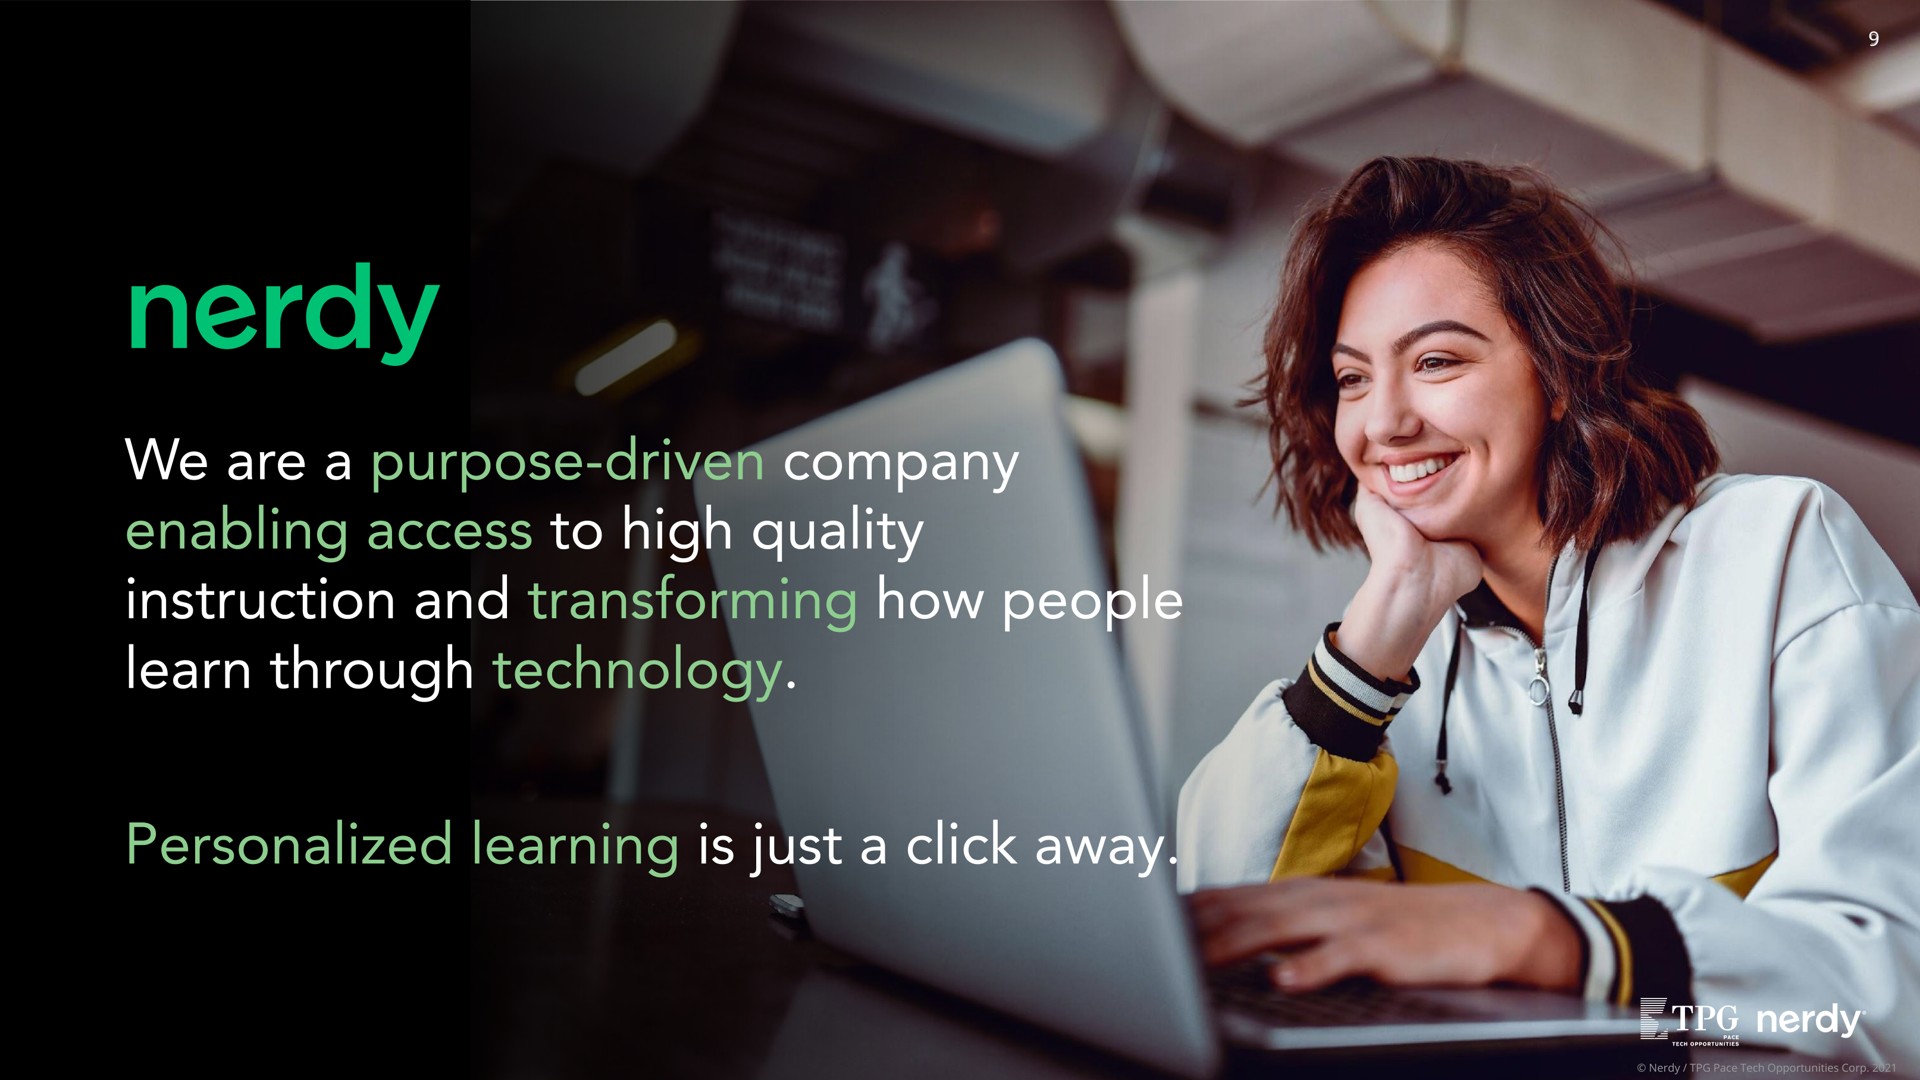 pace tech opportunities corp we are a purpose drive enabling access to high instruction and learn through technology personalized learning is just a | Nerdy